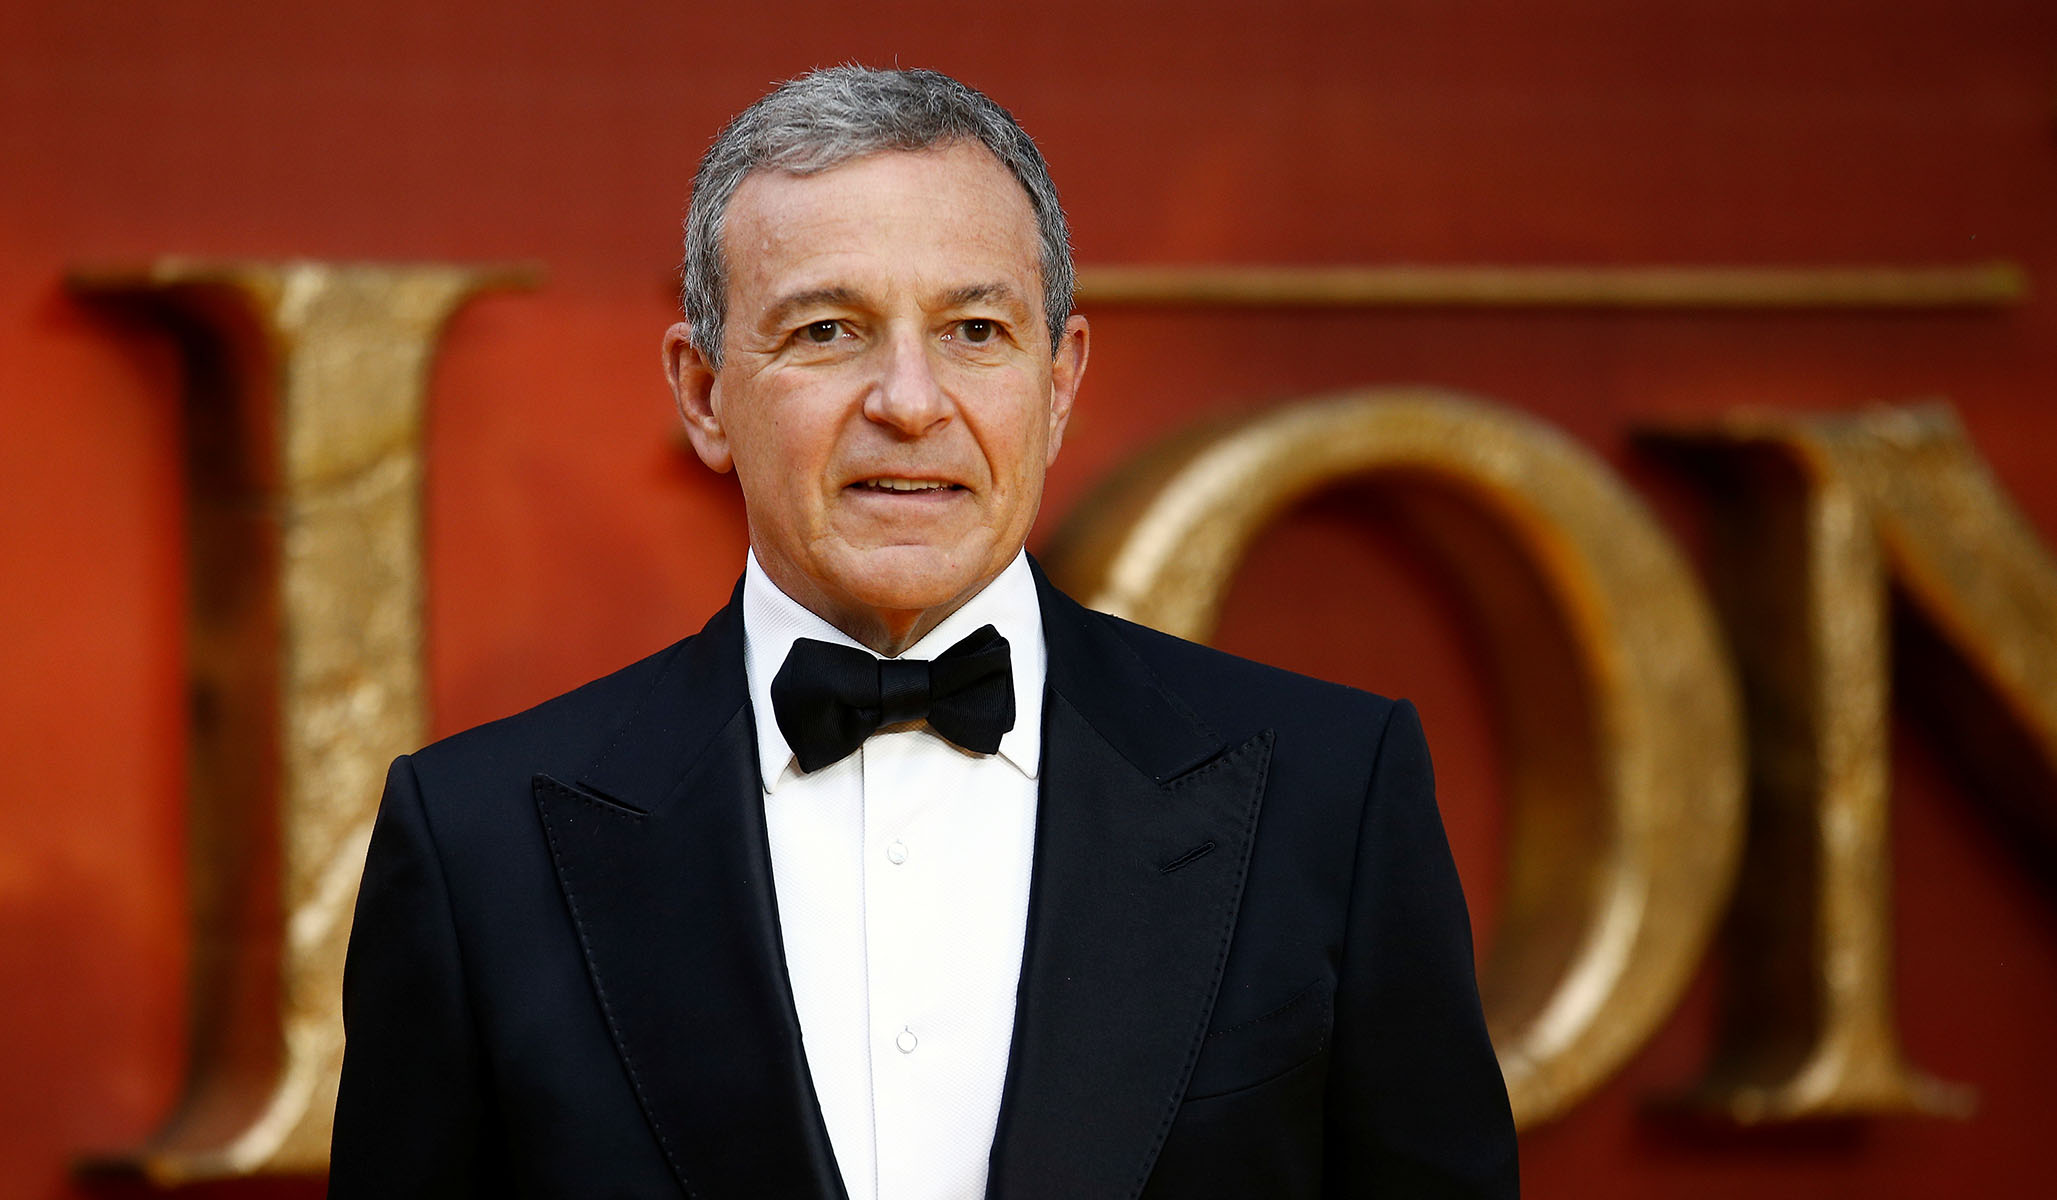 Walt Disney CEO Bob Iger attends the European premiere of "The Lion King" in London, Britain.